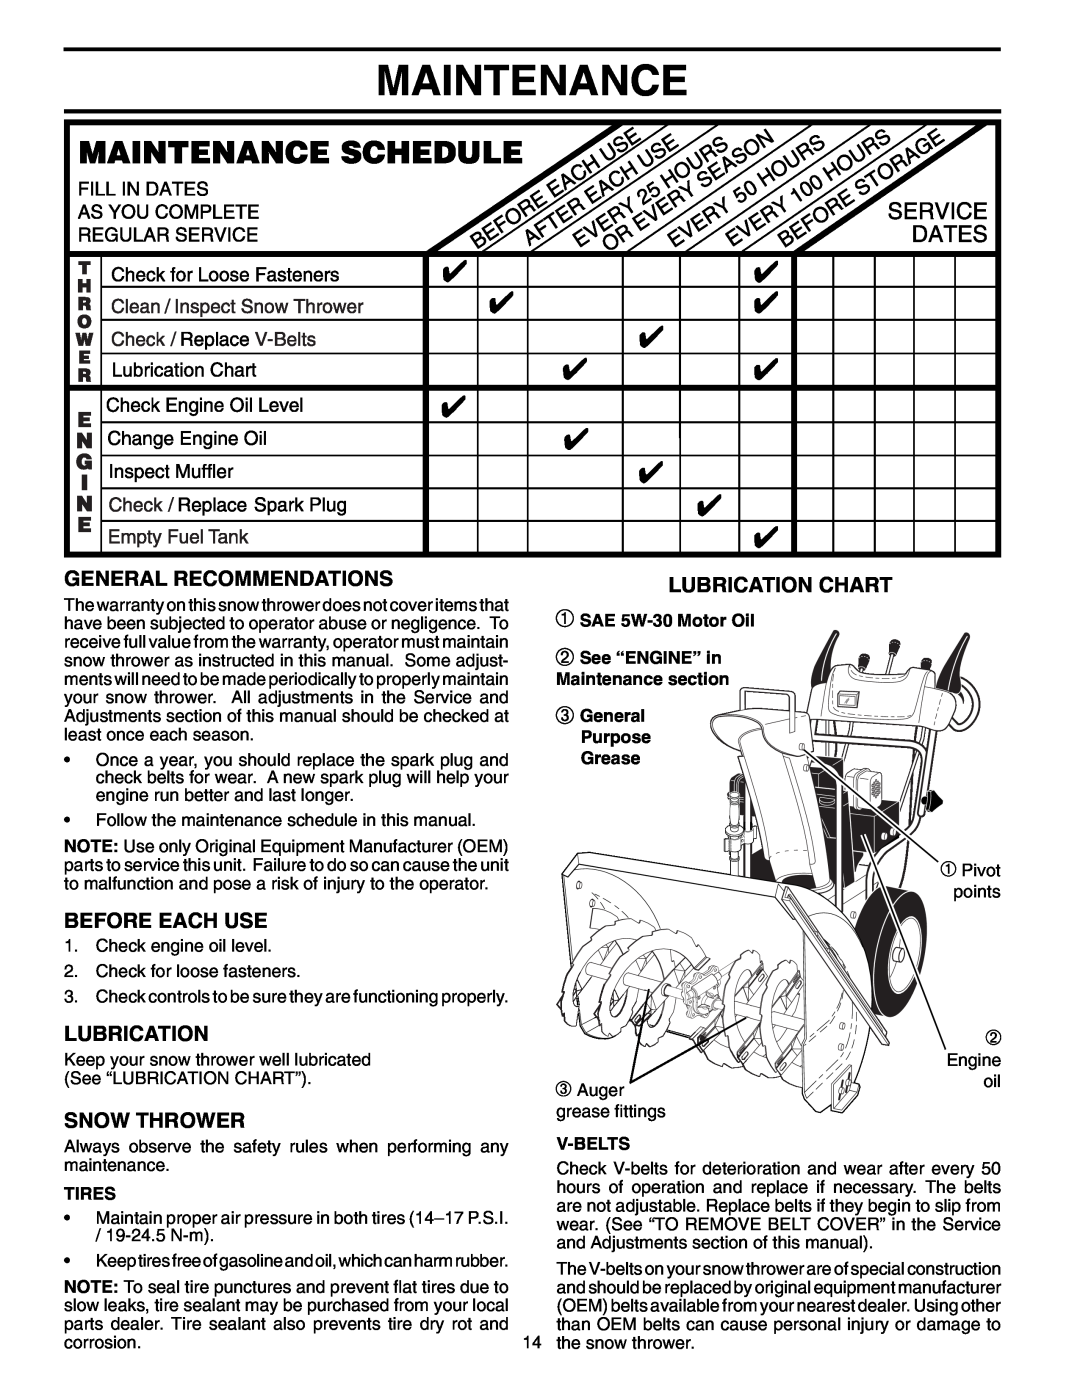 Poulan 96192001401 Maintenance, General Recommendations, Before Each Use, Snow Thrower, Lubrication Chart, Tires 